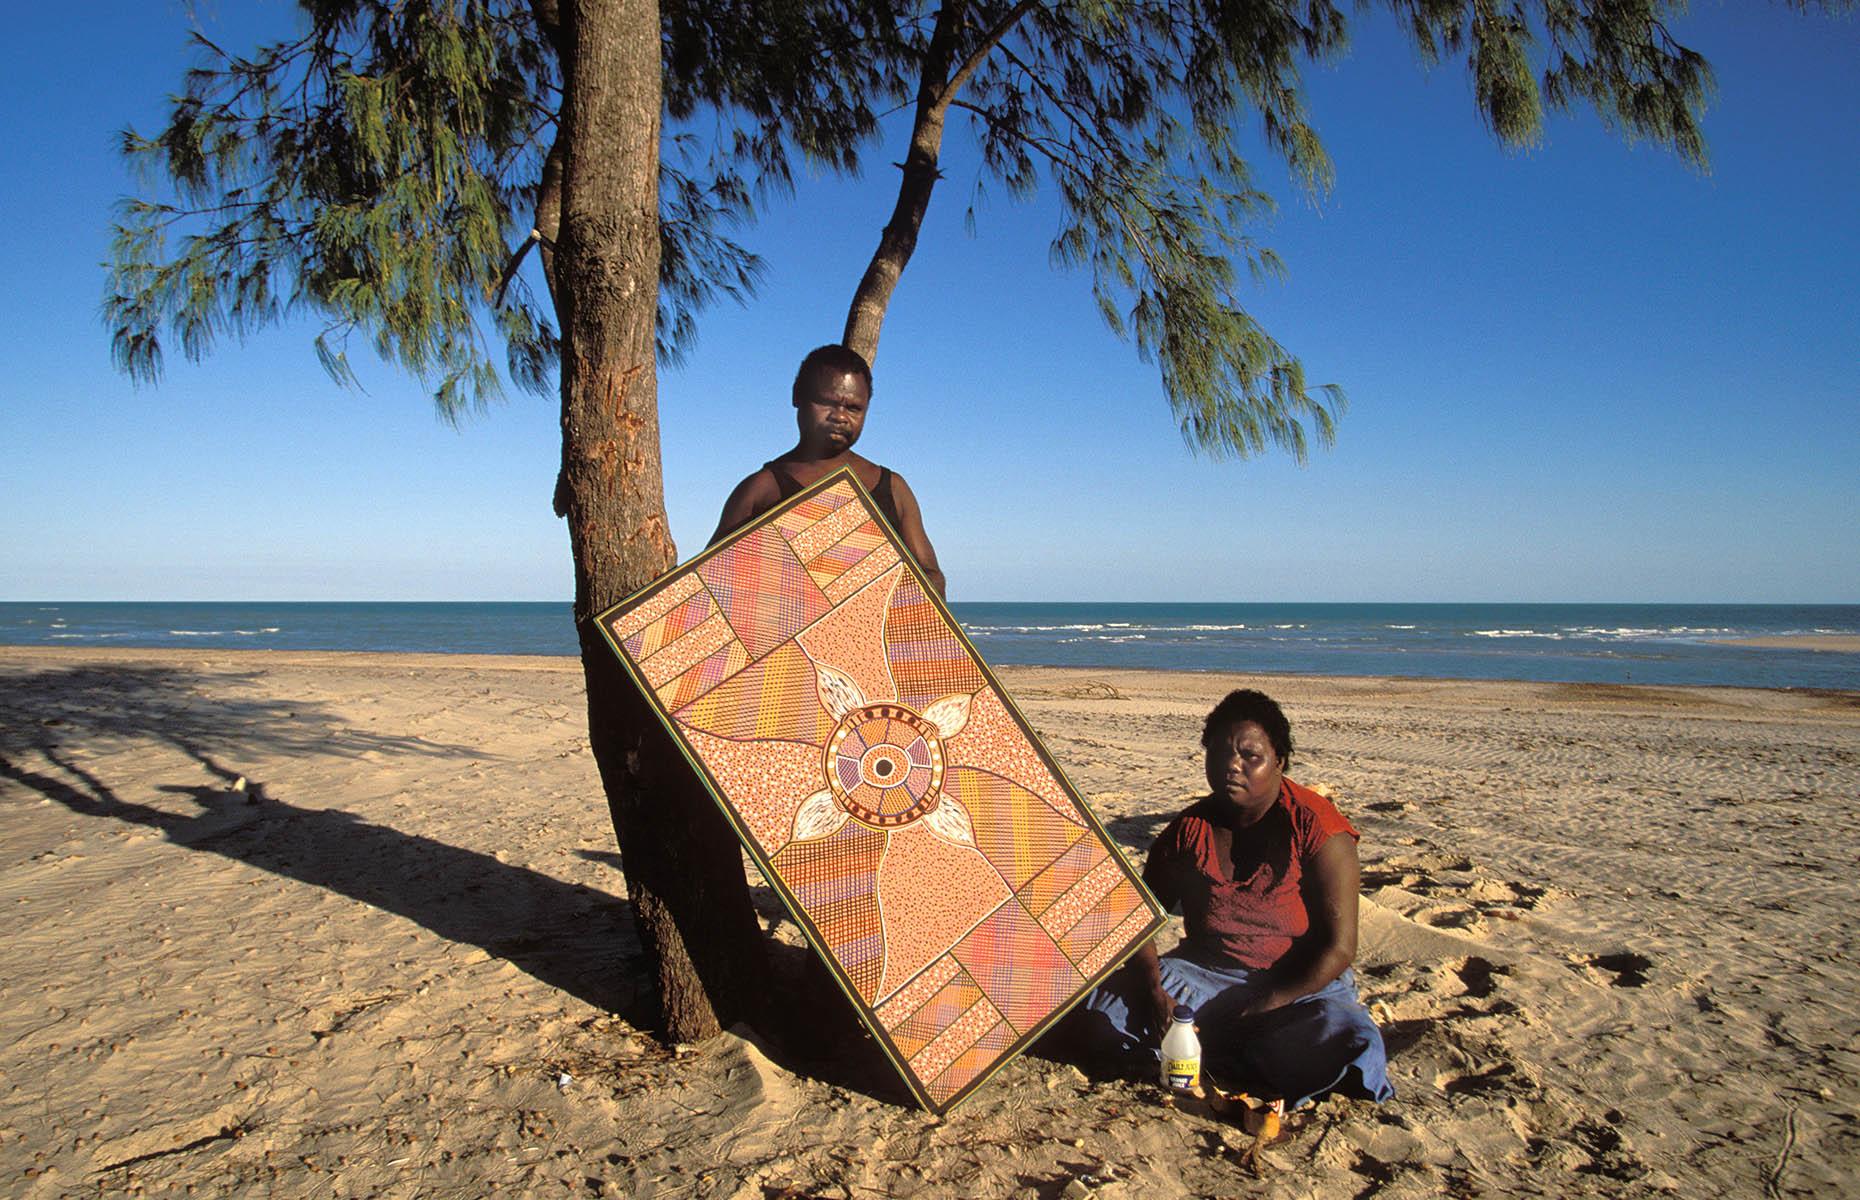 <p>Known as Galiwin’ku by its traditional owners, Elcho Island sits at the southern end of the Wessel Islands group off Arnhem Land in Australia’s Northern Territory. It is home to one of the most remote Aboriginal communities in Australia and is famous for its untouched native flora and fauna, beaches backed by deep-red cliffs, and a strong culture where artistic traditions flourish. The Elcho Island Arts center features the work of over 200 artists including Banumbirr (Morning Star Poles), bark paintings, fiber art, yidaki (didgeridoo), and jewelry.</p>